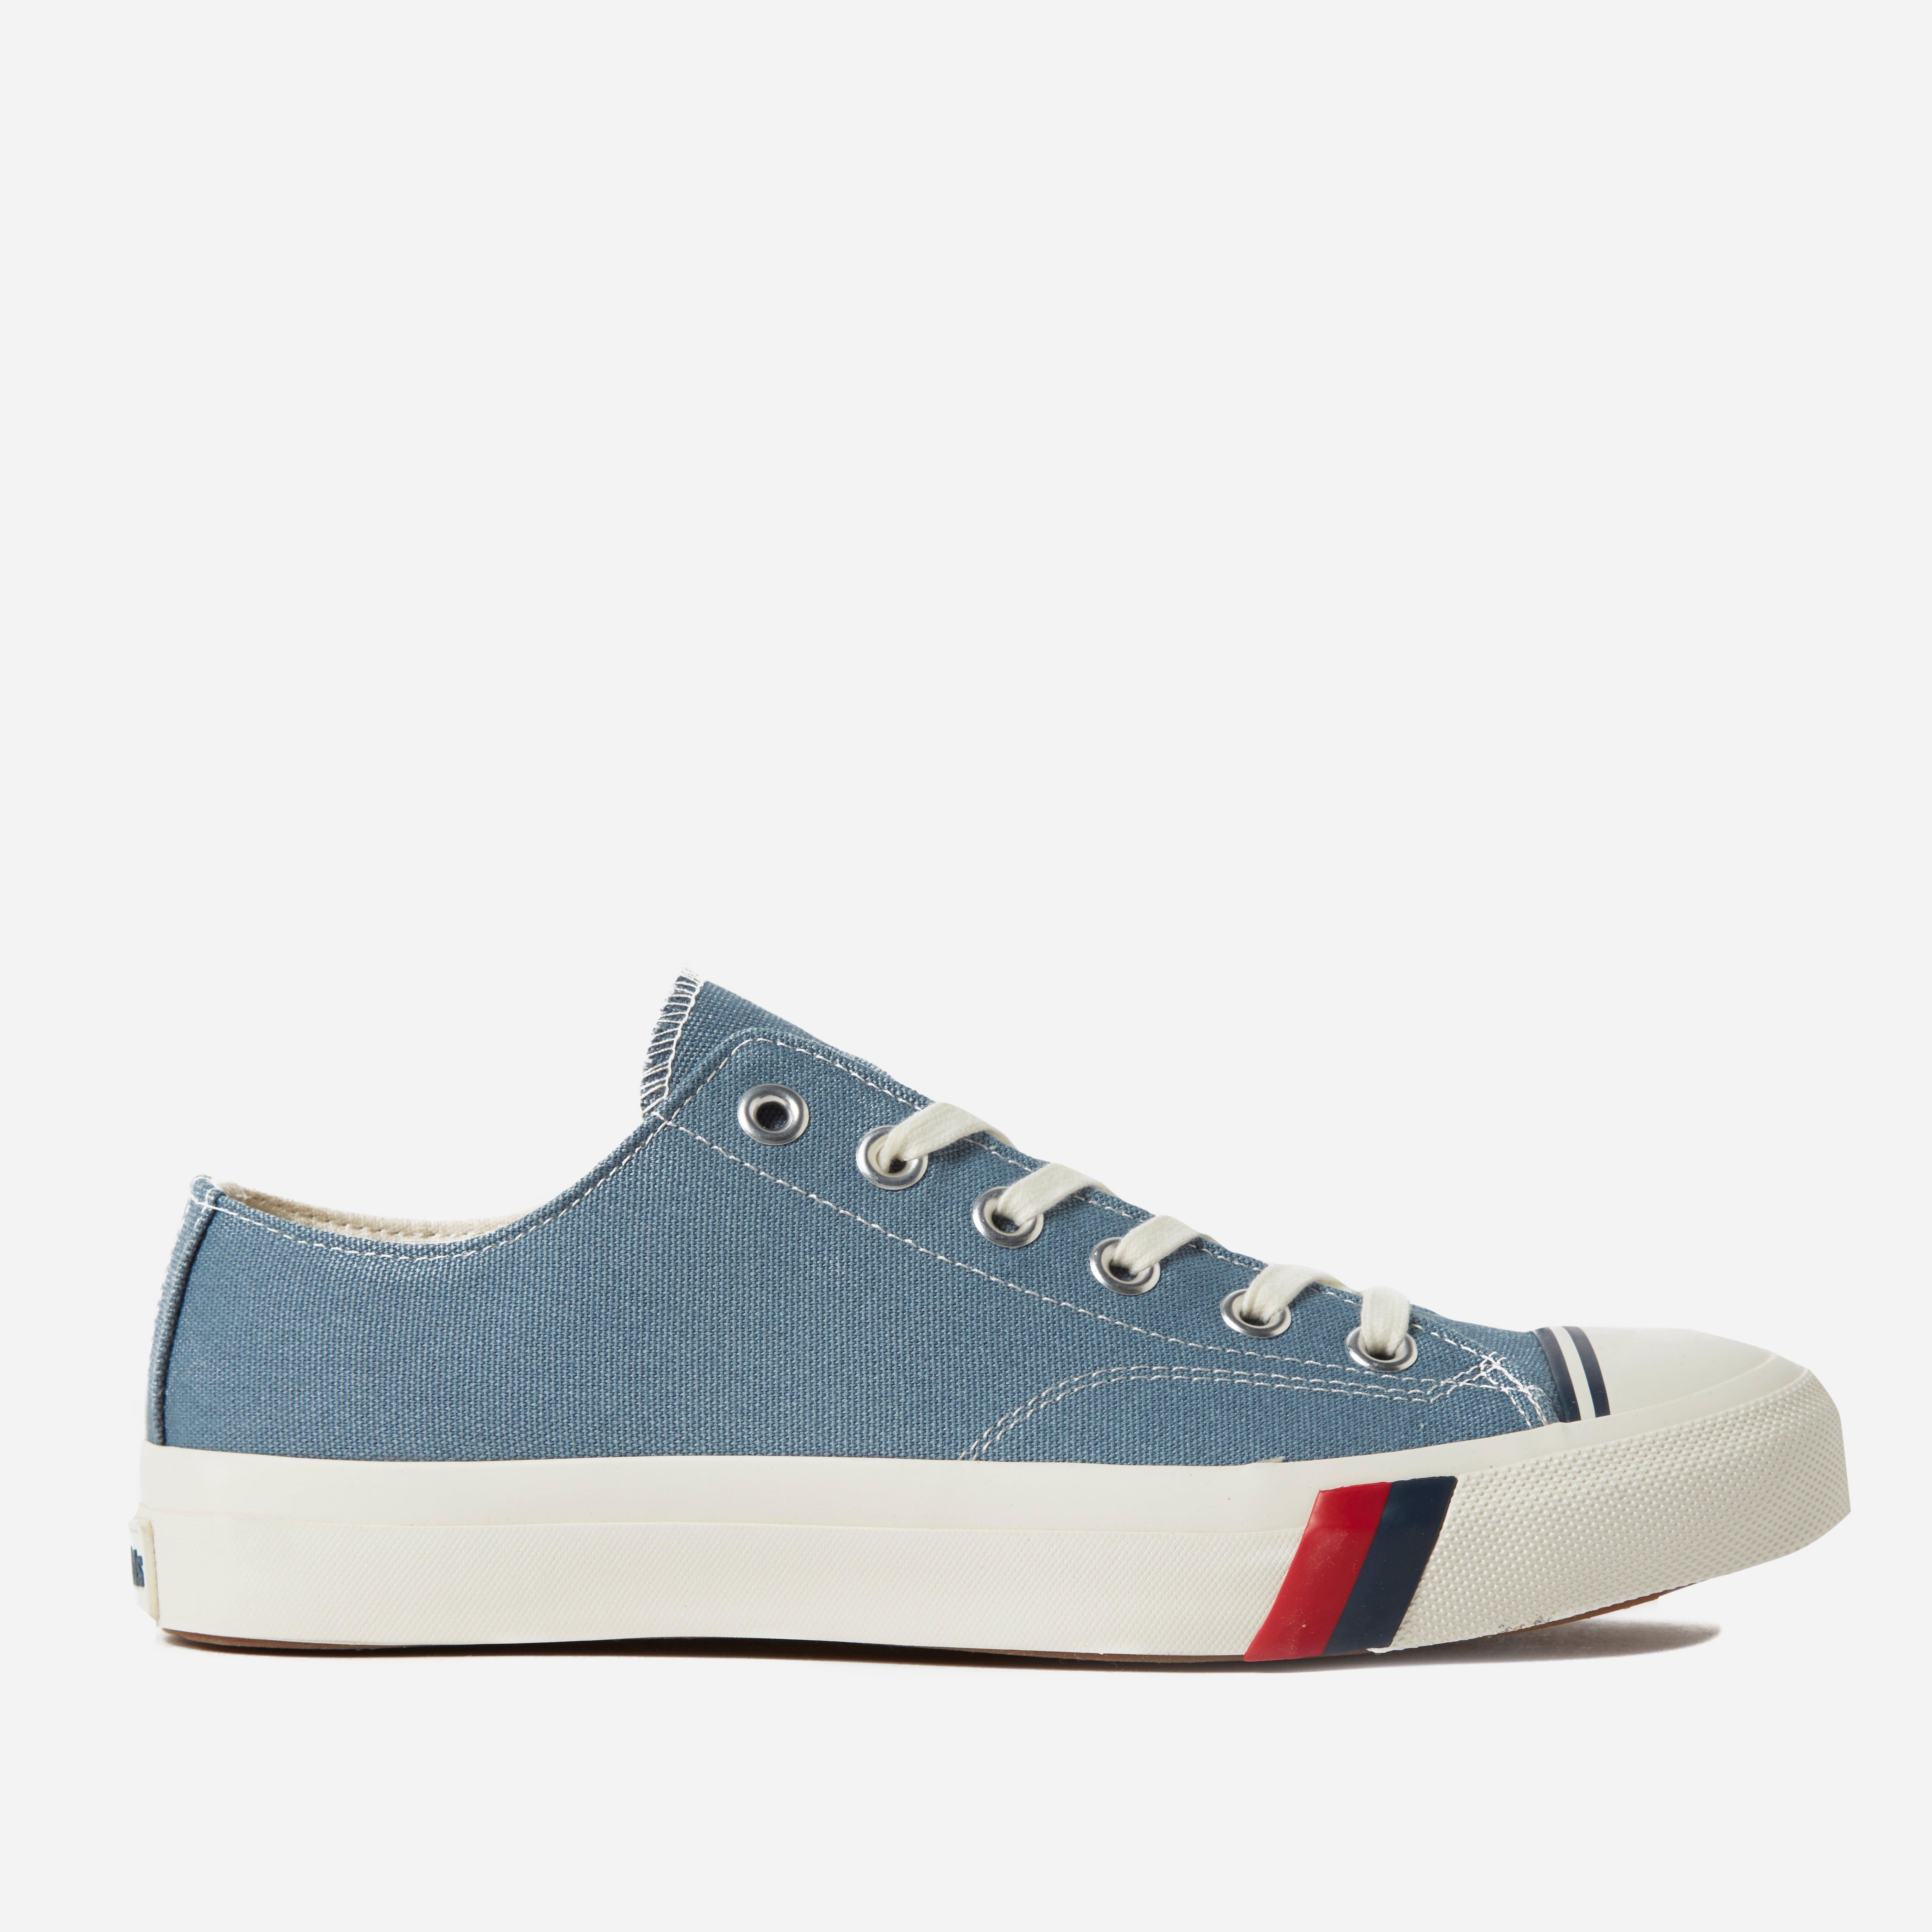 Pro Keds Royal Lo Canvas in Blue for Men - Lyst